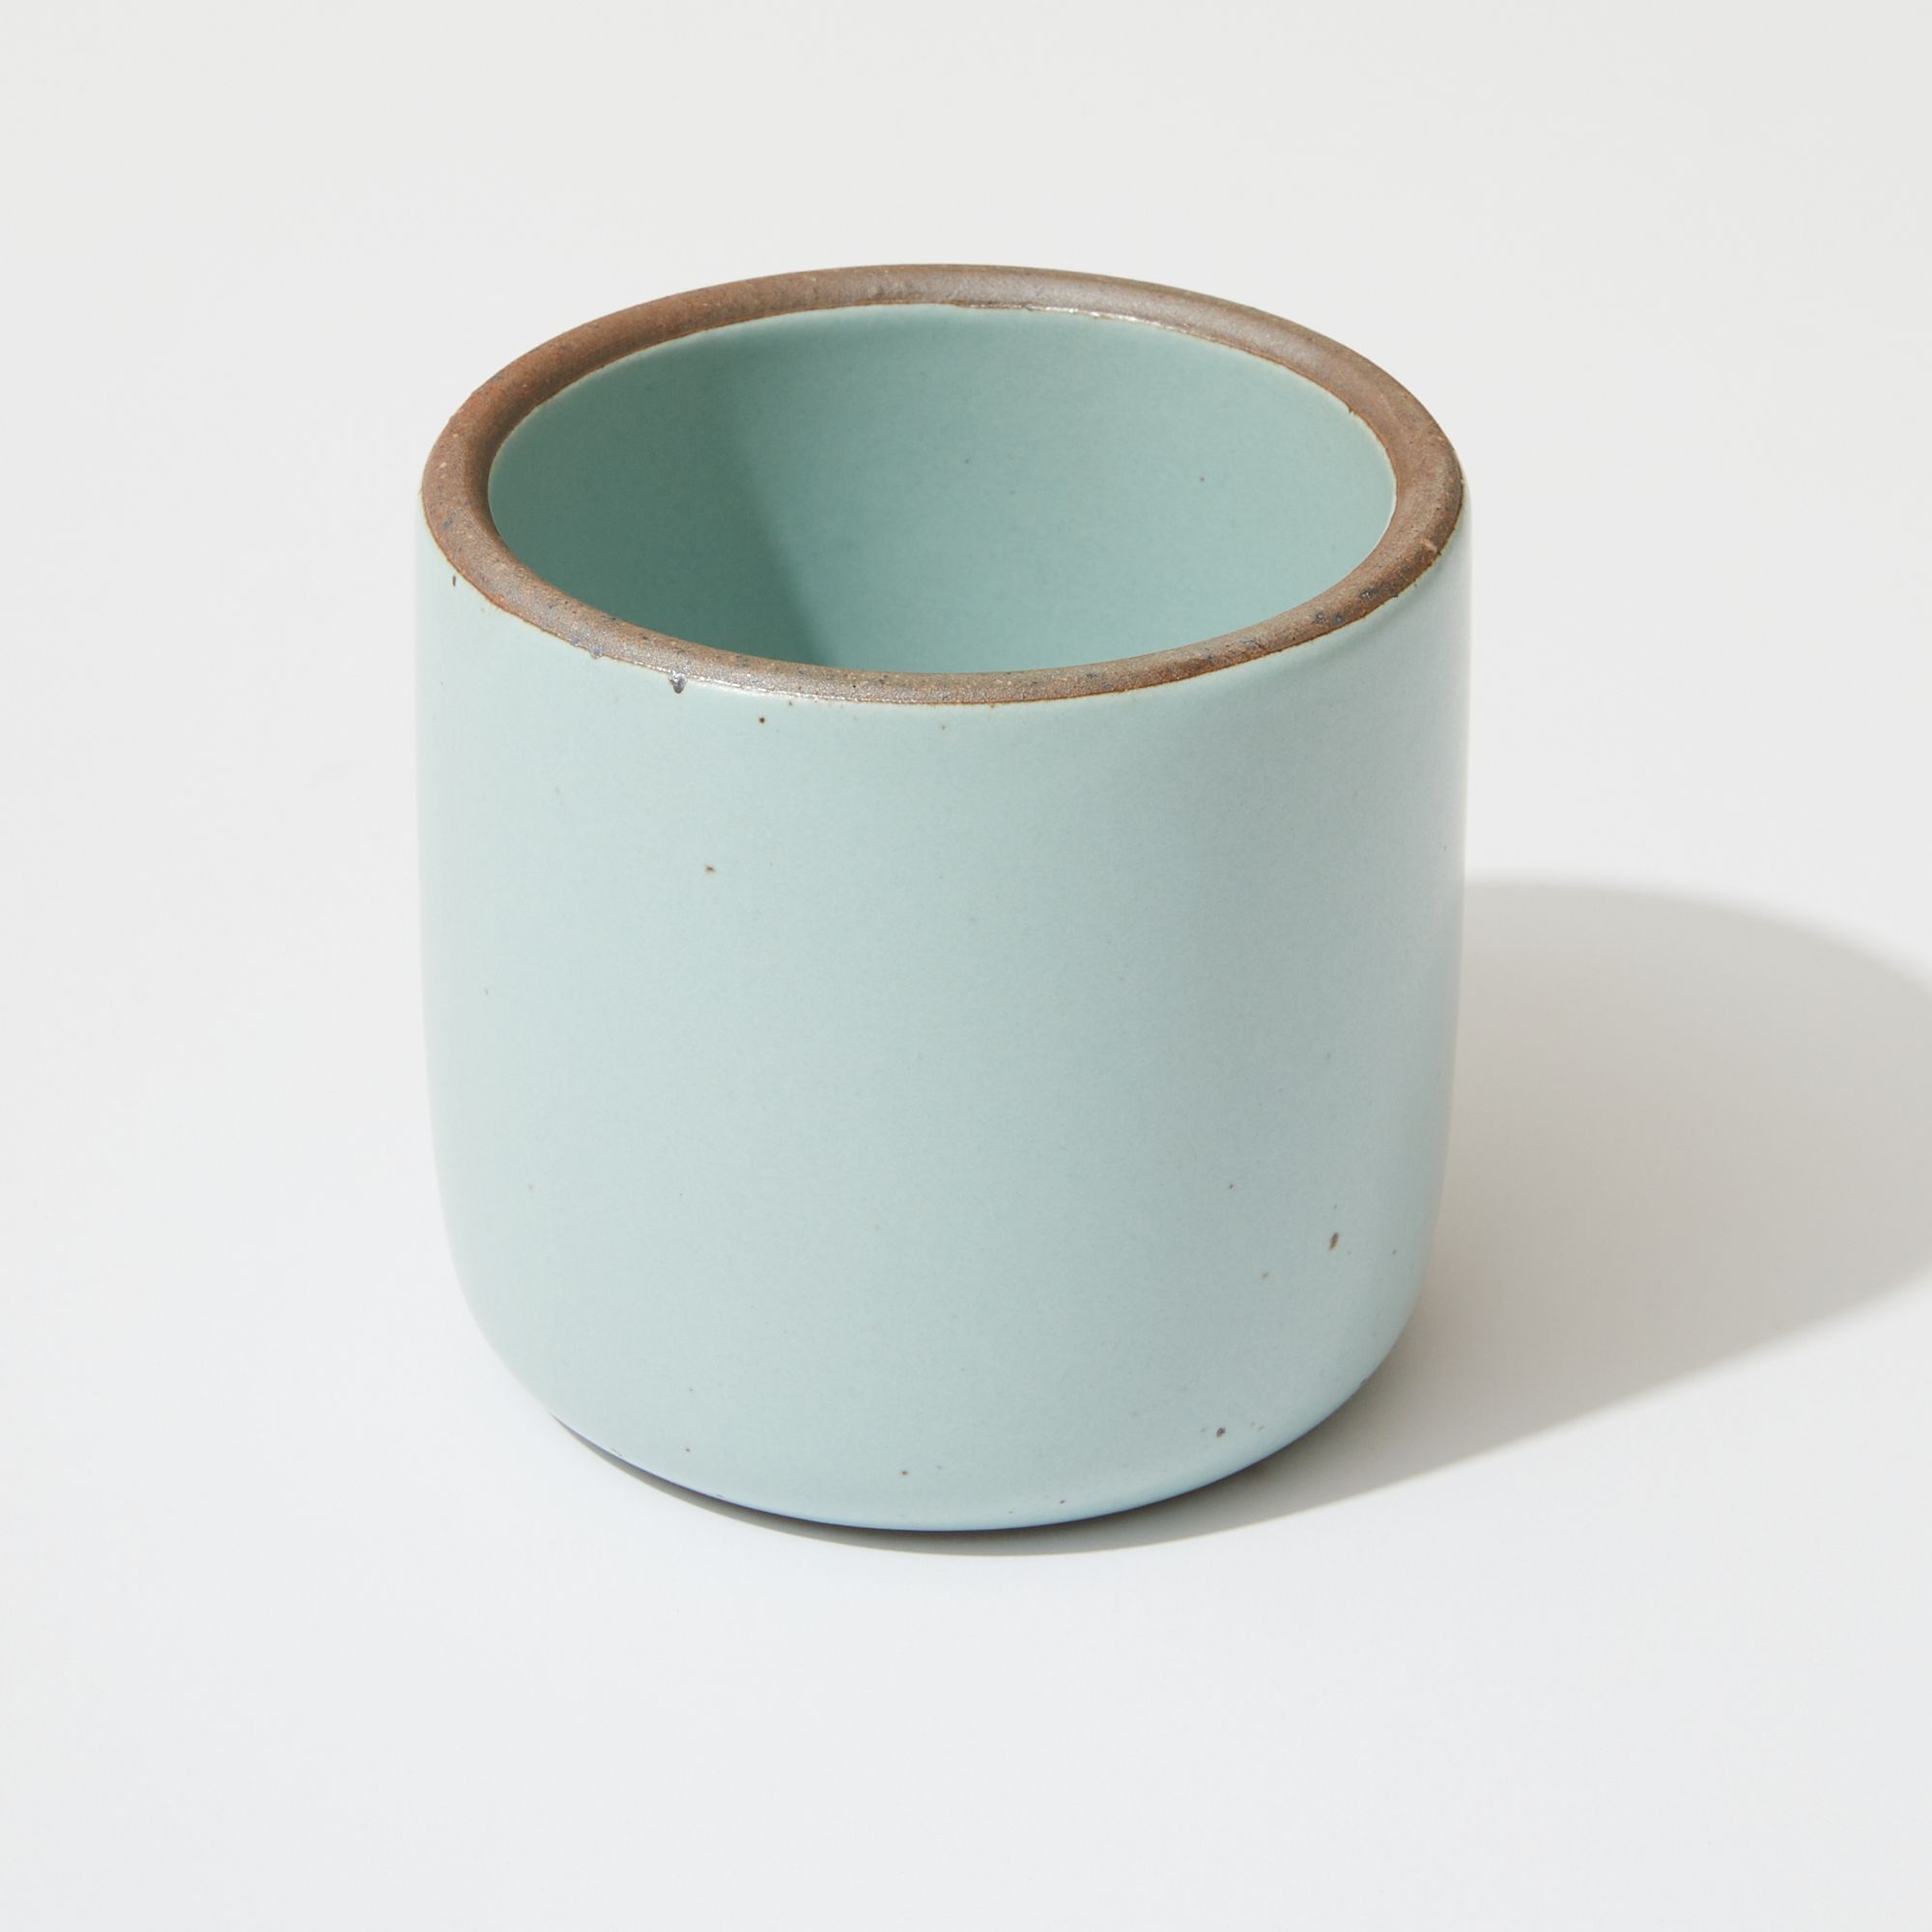 A ceramic cup in a pale turquoise color with a raw unglazed rim